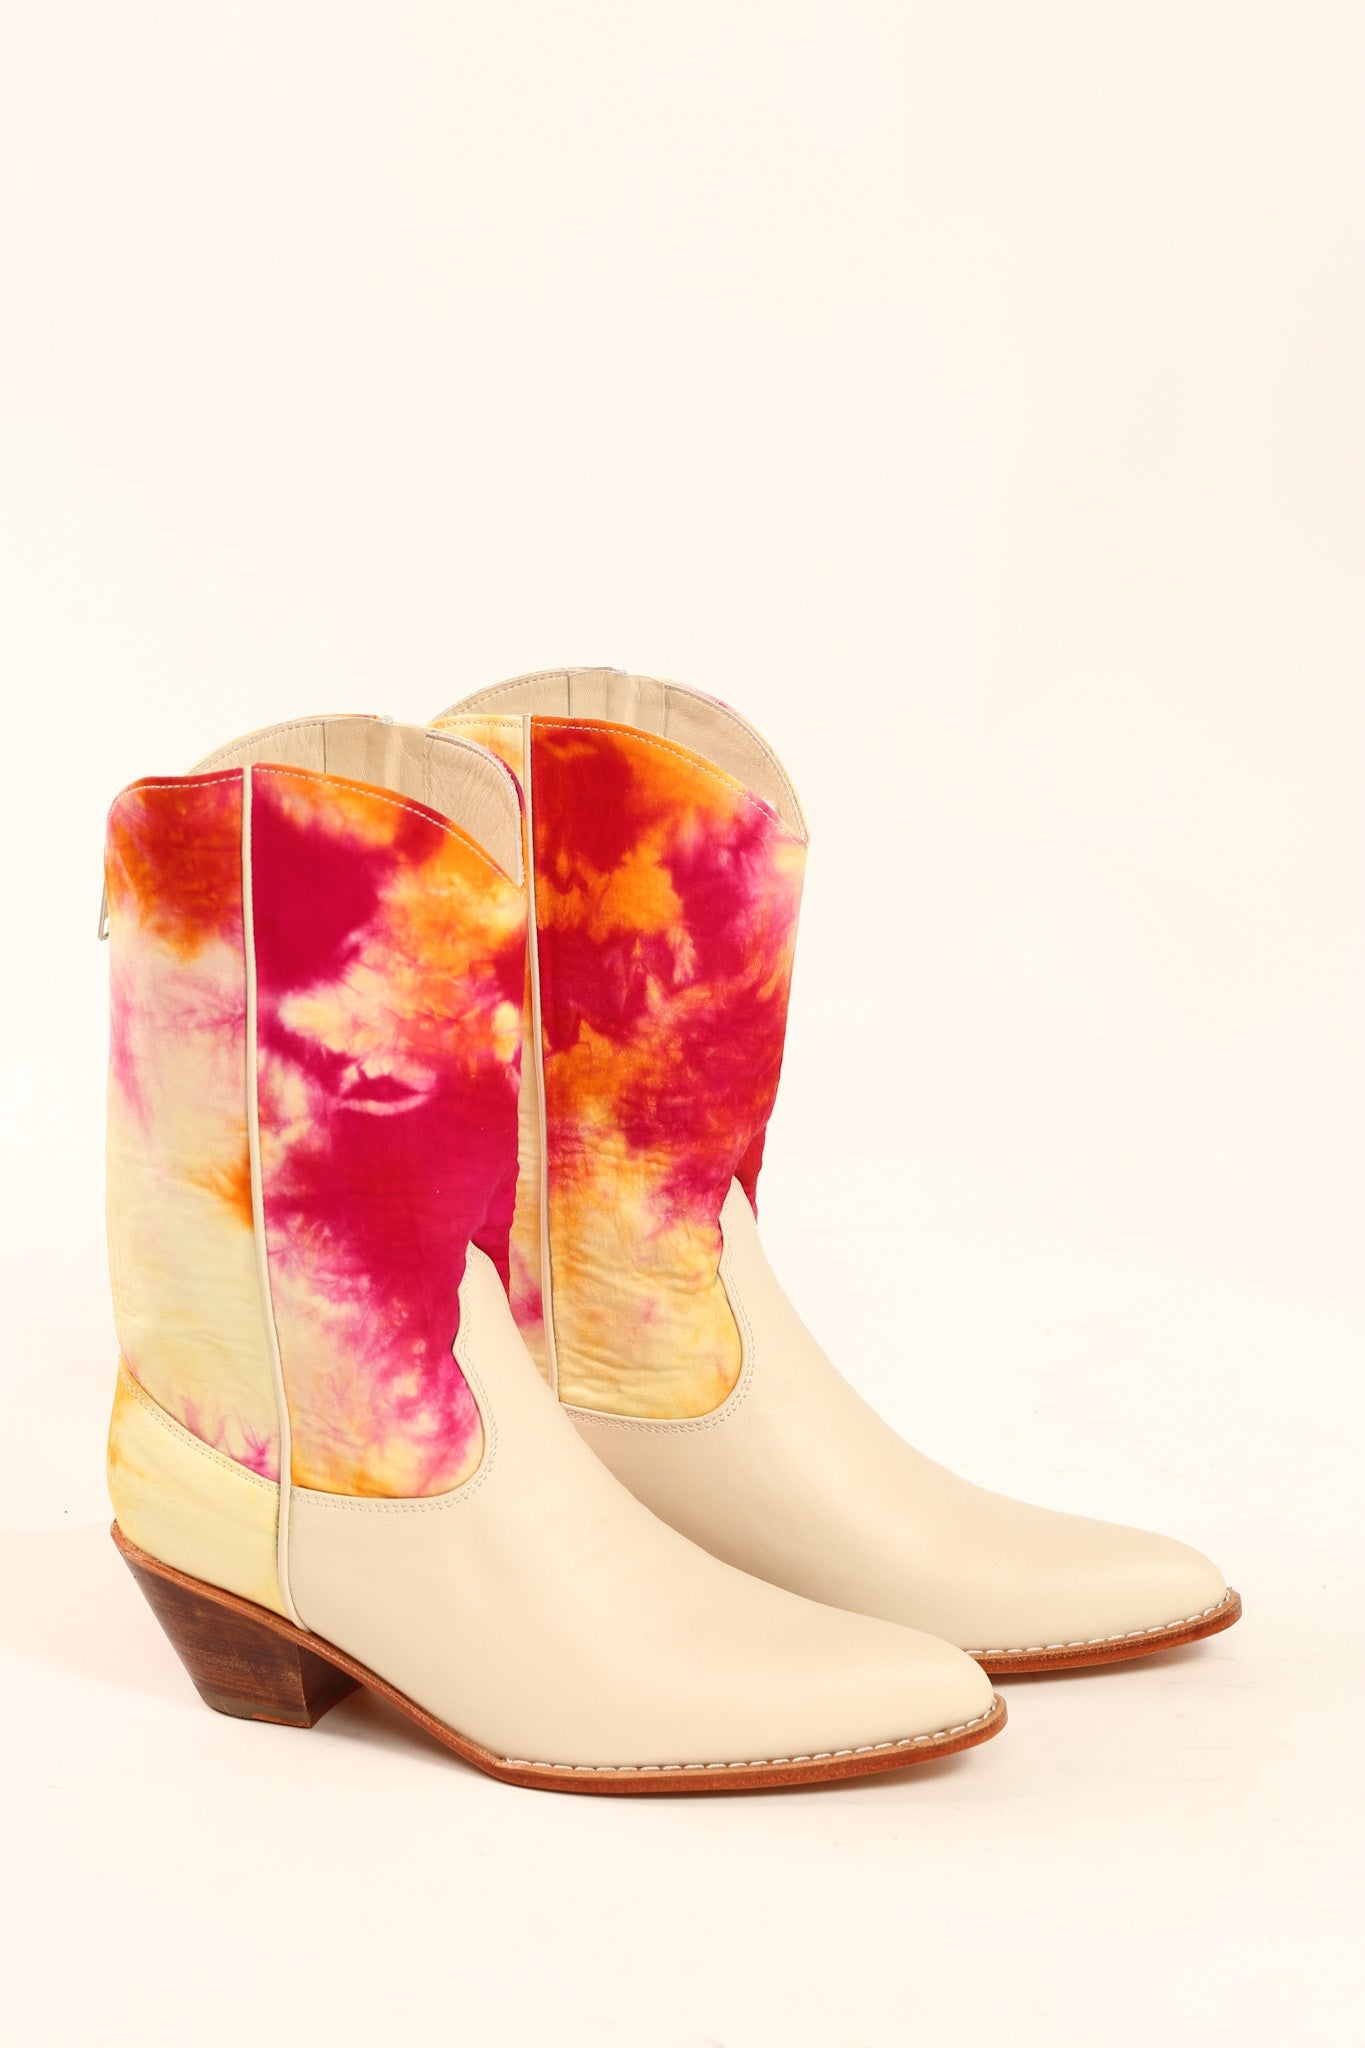 TIE DYE BOOTS LAURIES